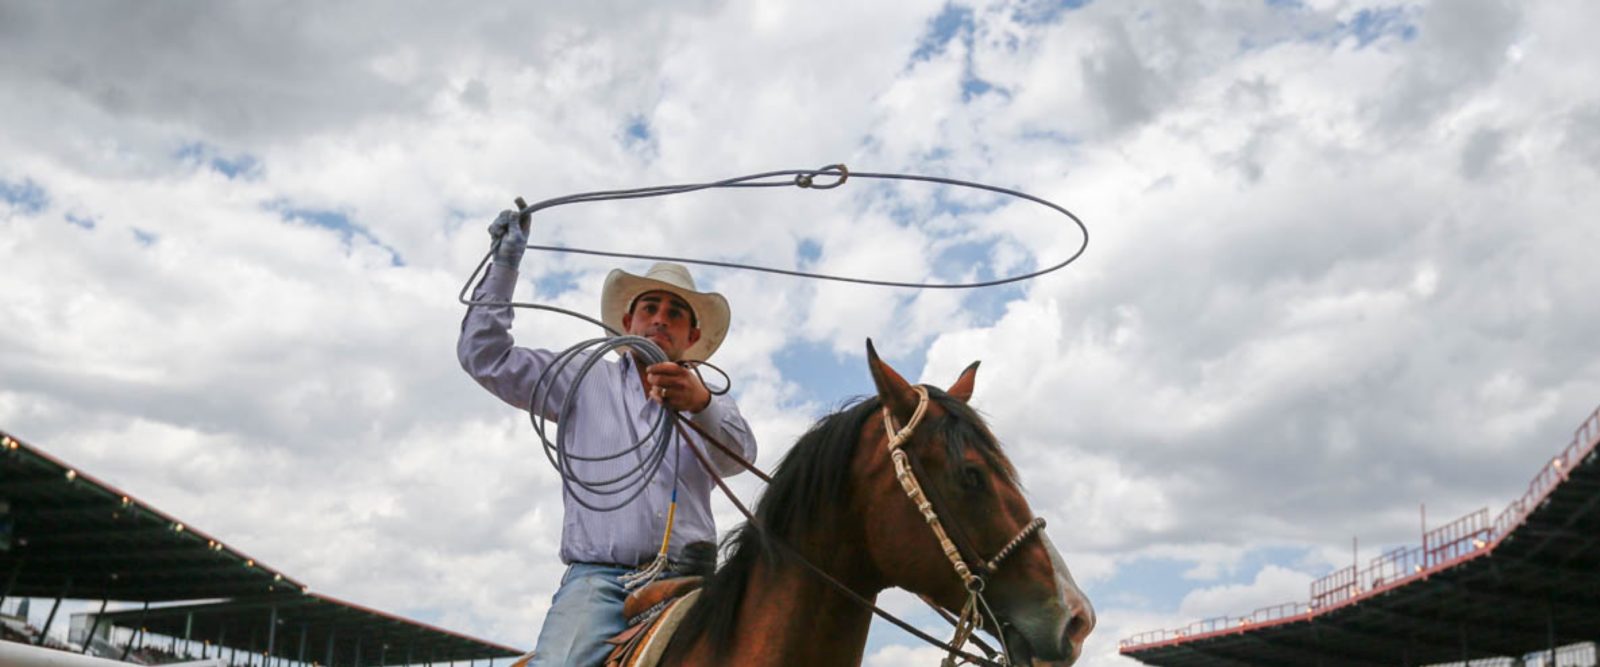 The Rodeo: Team Roping banner image.